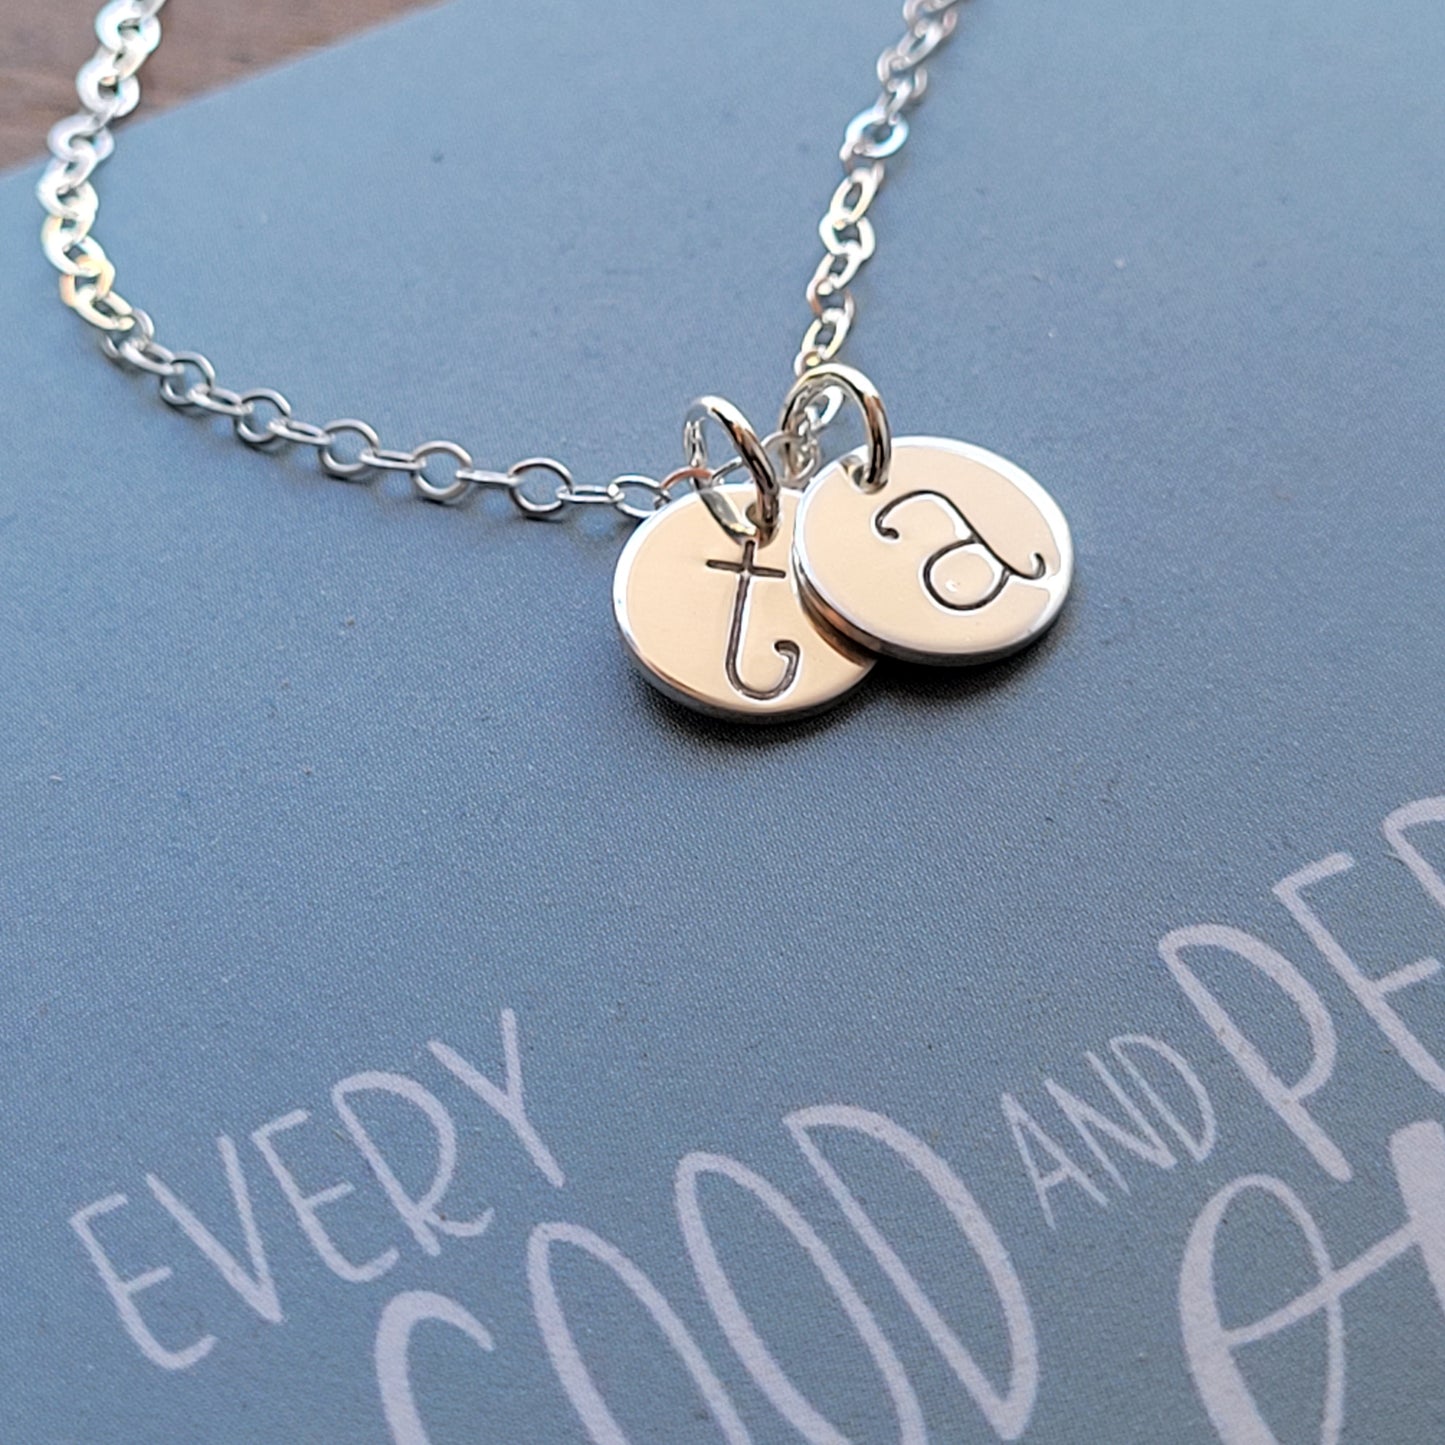 Personalized Initial Necklace . Every Good + Perfect Gift Faith Jewelry